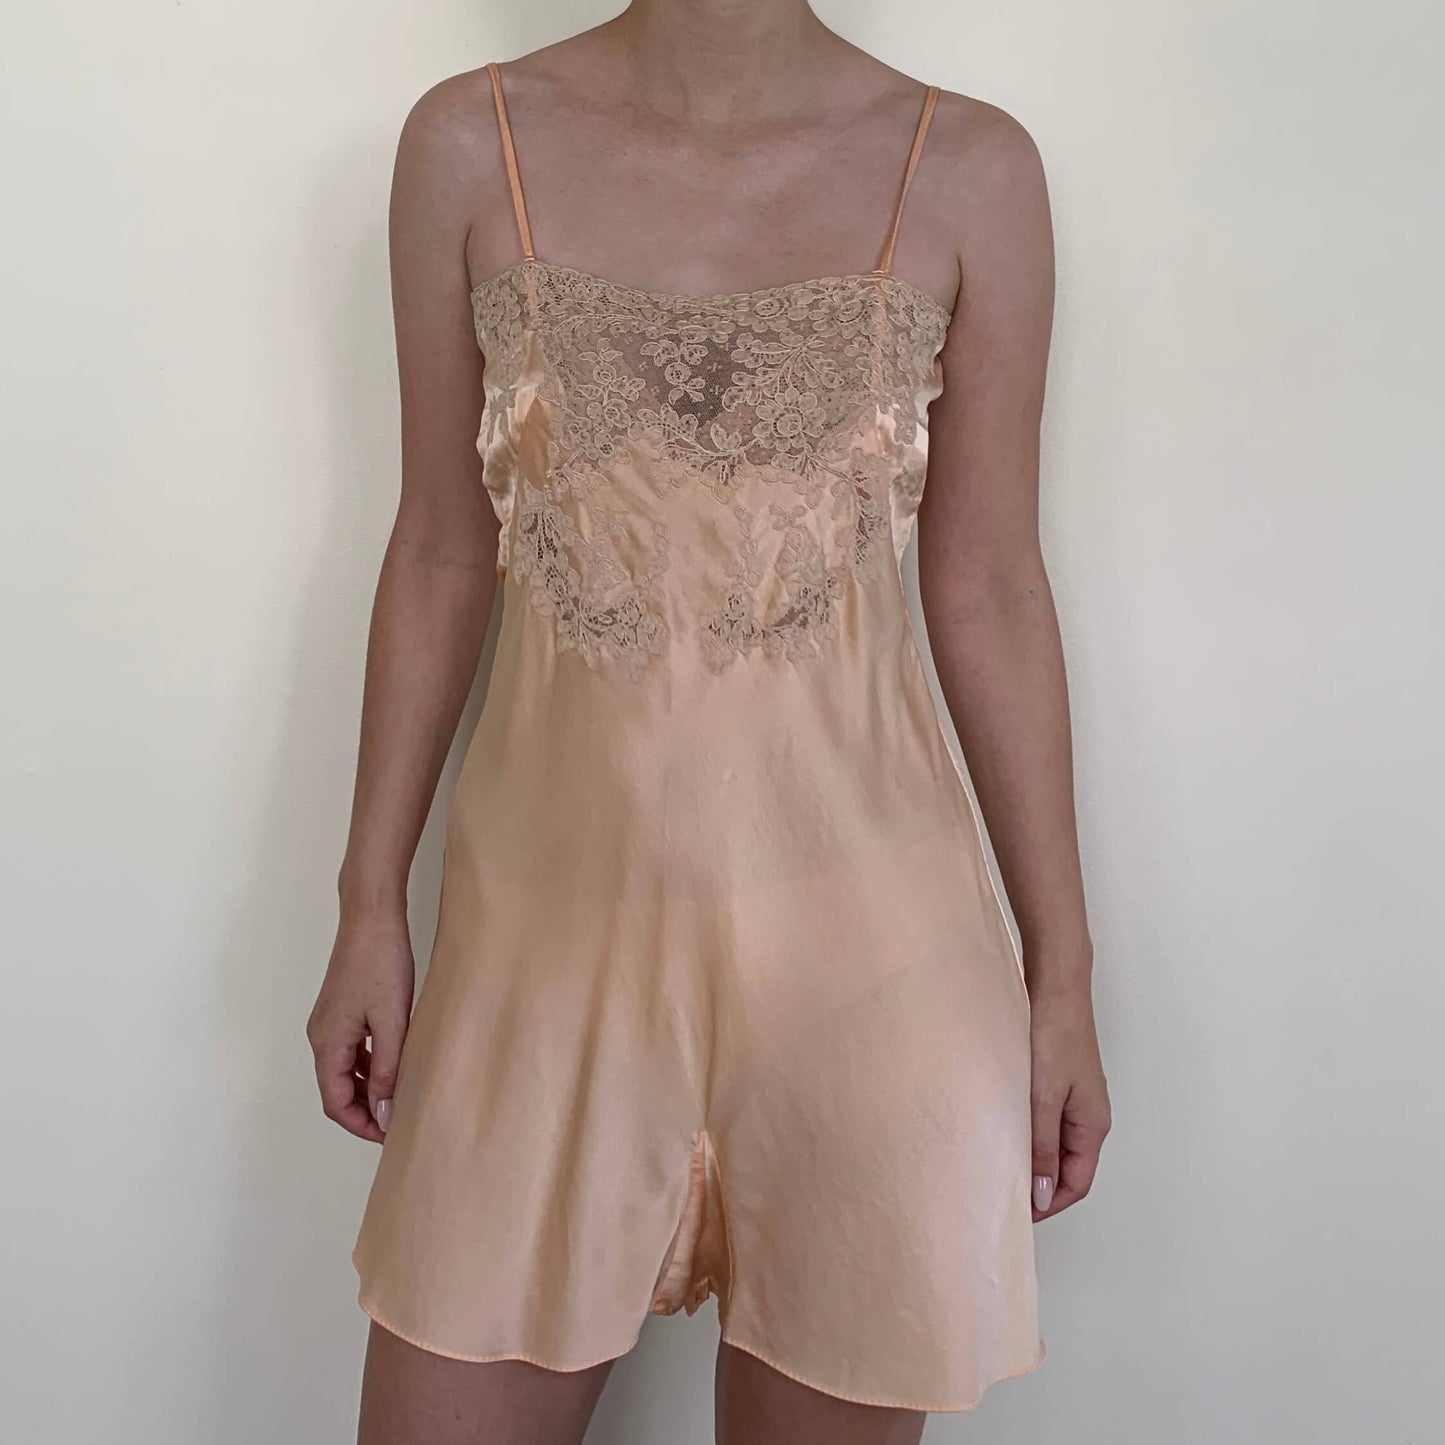 Vintage 1930s step in chemise in peach silk with beige alencon lace detail